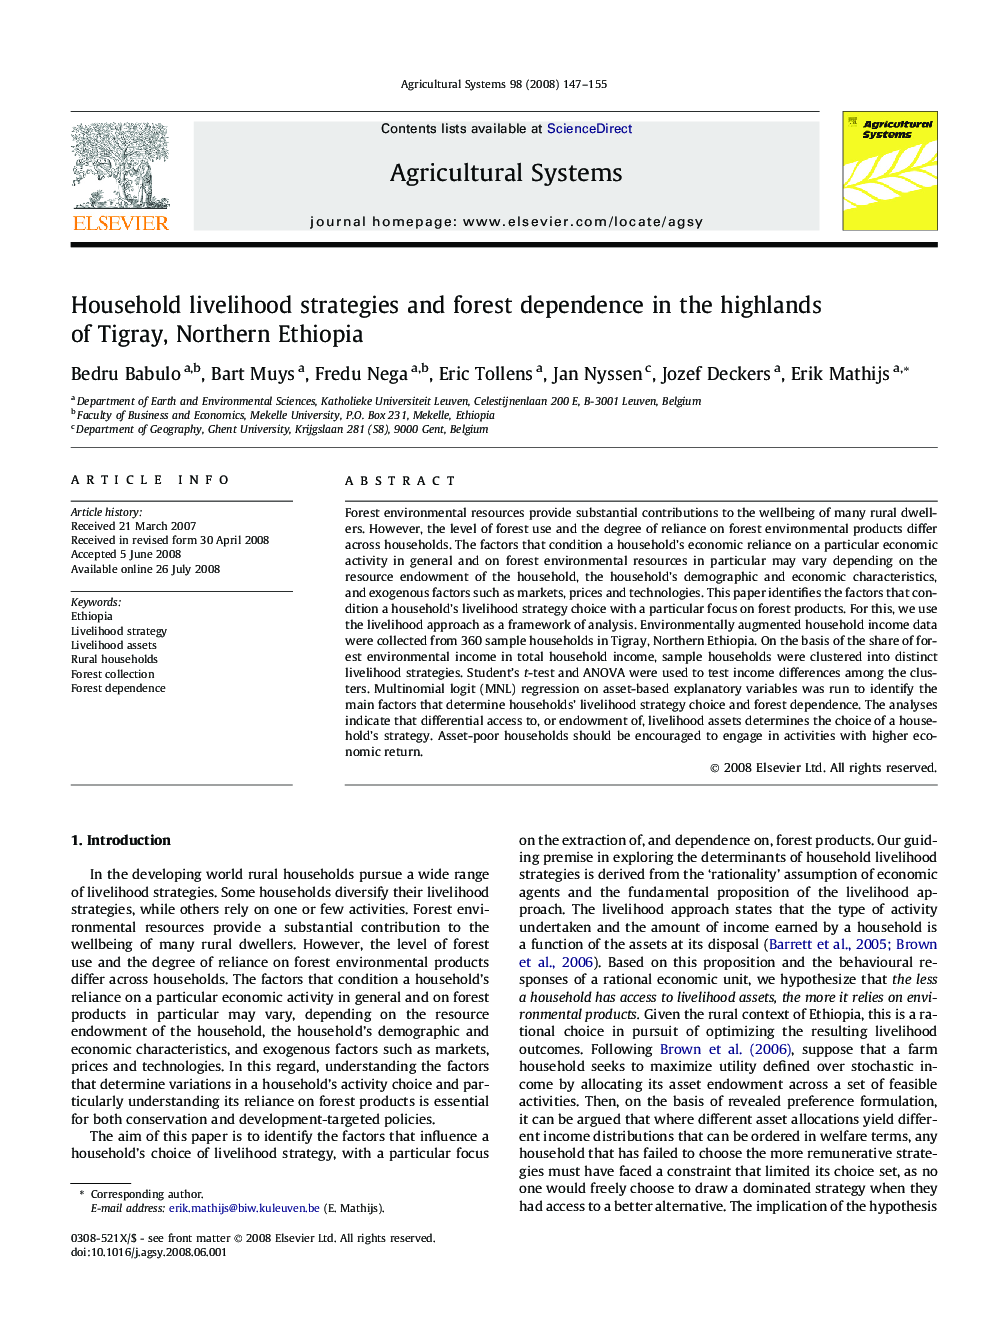 Household livelihood strategies and forest dependence in the highlands of Tigray, Northern Ethiopia